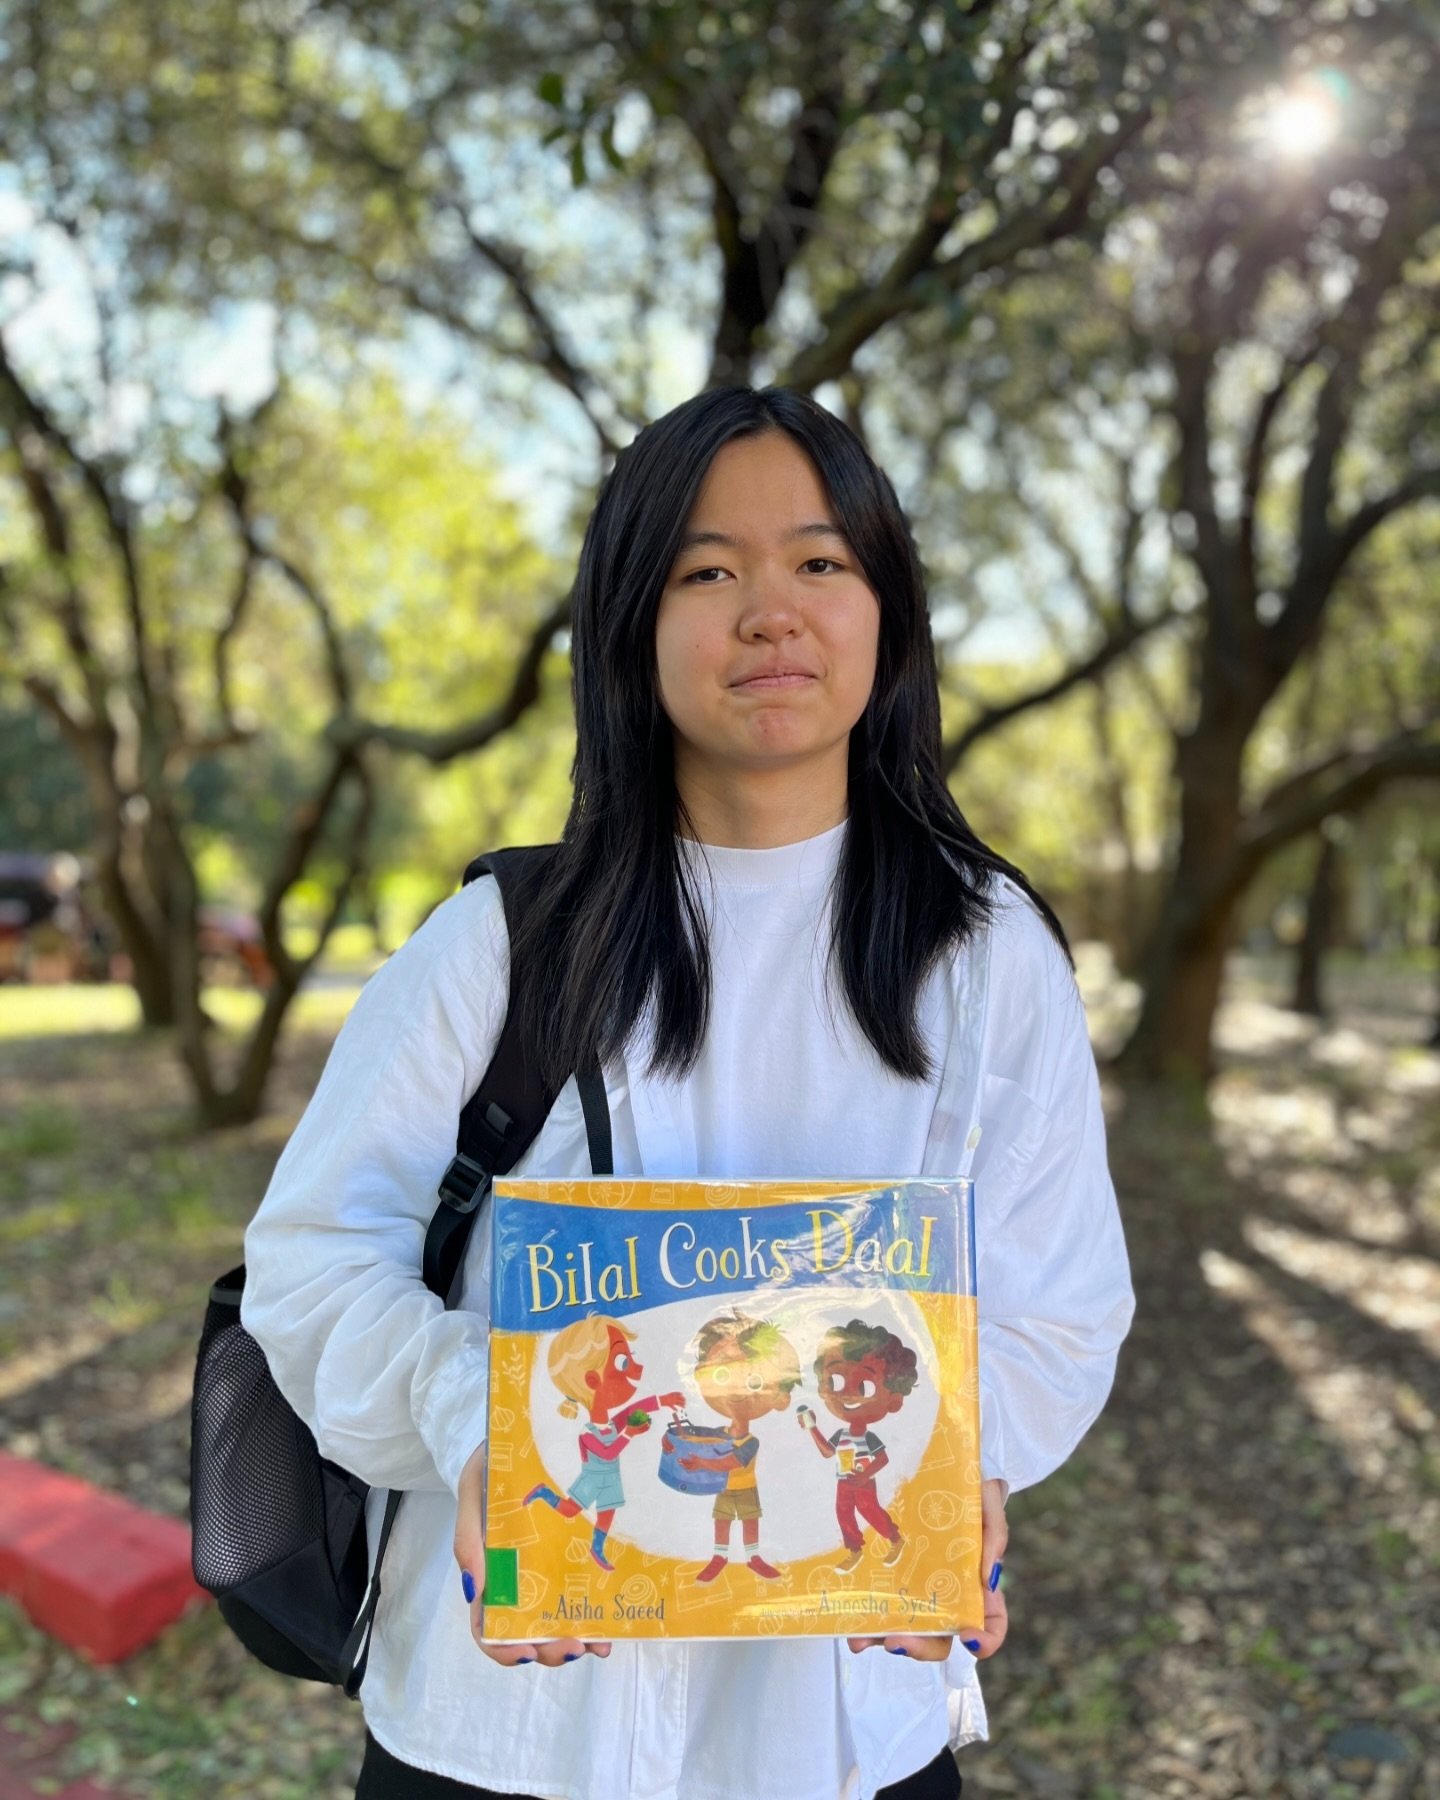 Book Recommendation Friday for #AAPIMonth! Bilal Cooks Daal by Aisha Saeed, Illustrated by Anoosha Syed!

Available now in our library ✌️❤️

#aapi #books #rock #our #collective #socks